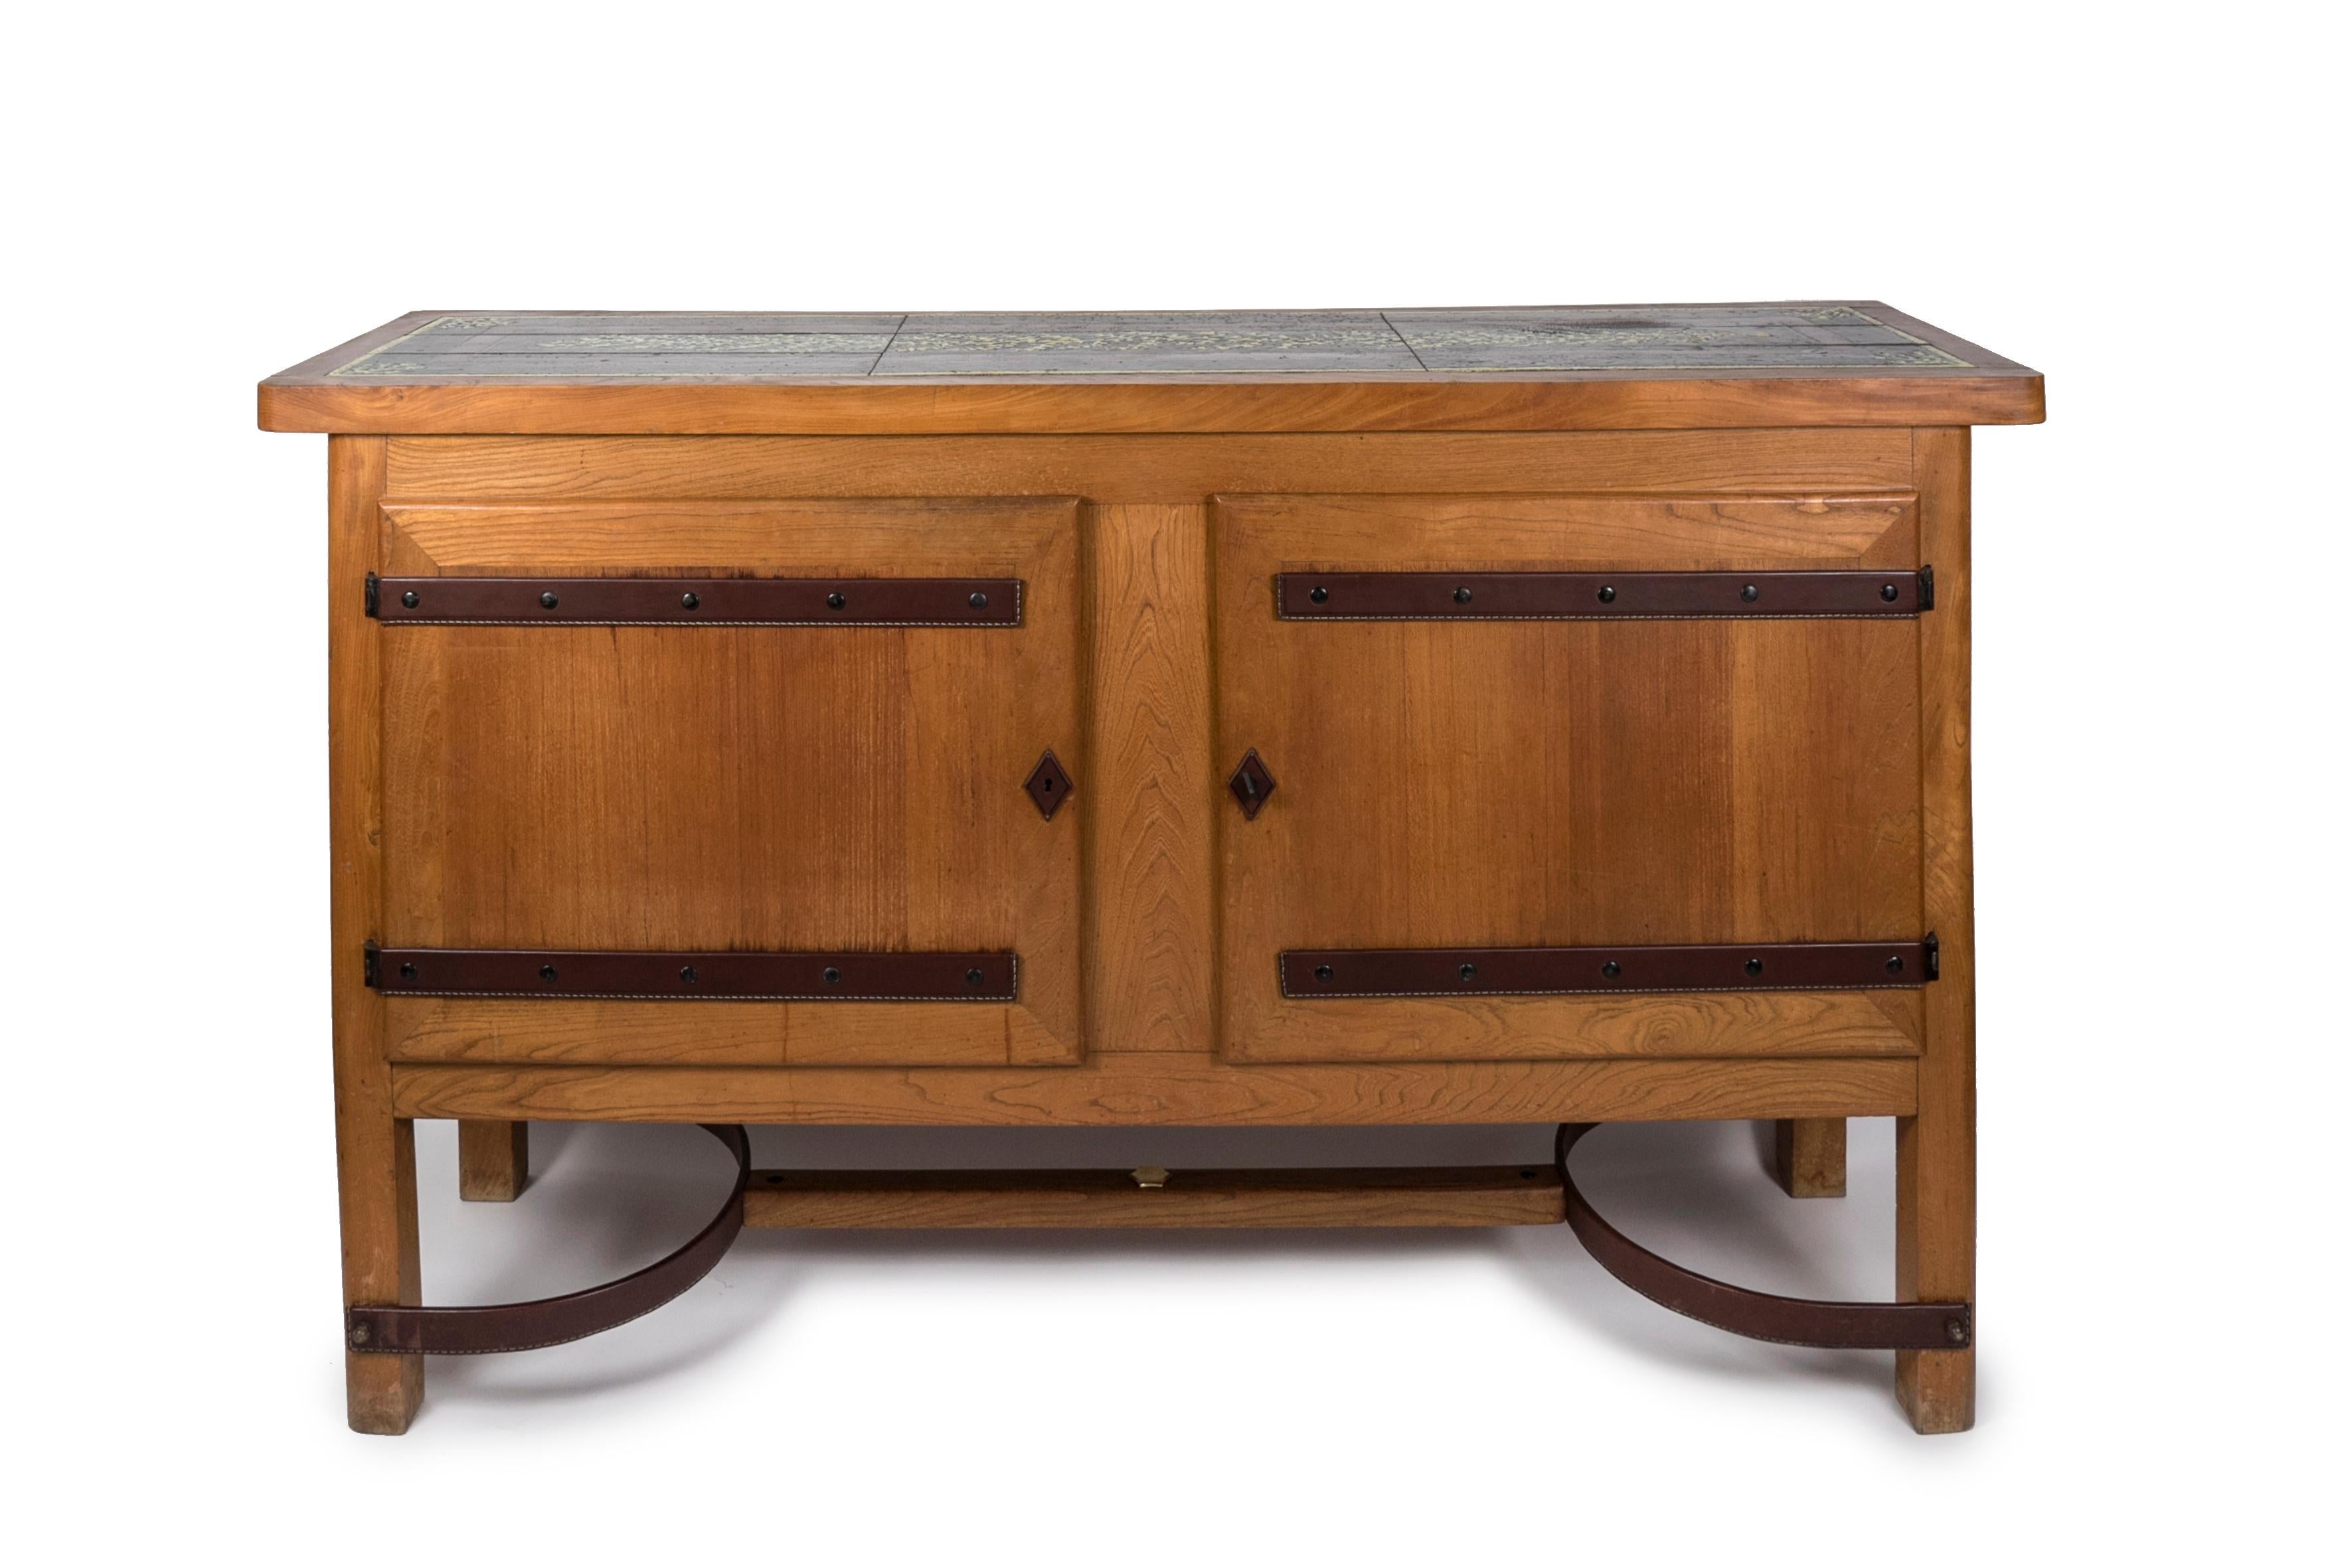 Rare sideboard with ceramic top
Oak and stitched leather part 
Good vintage condition
France.